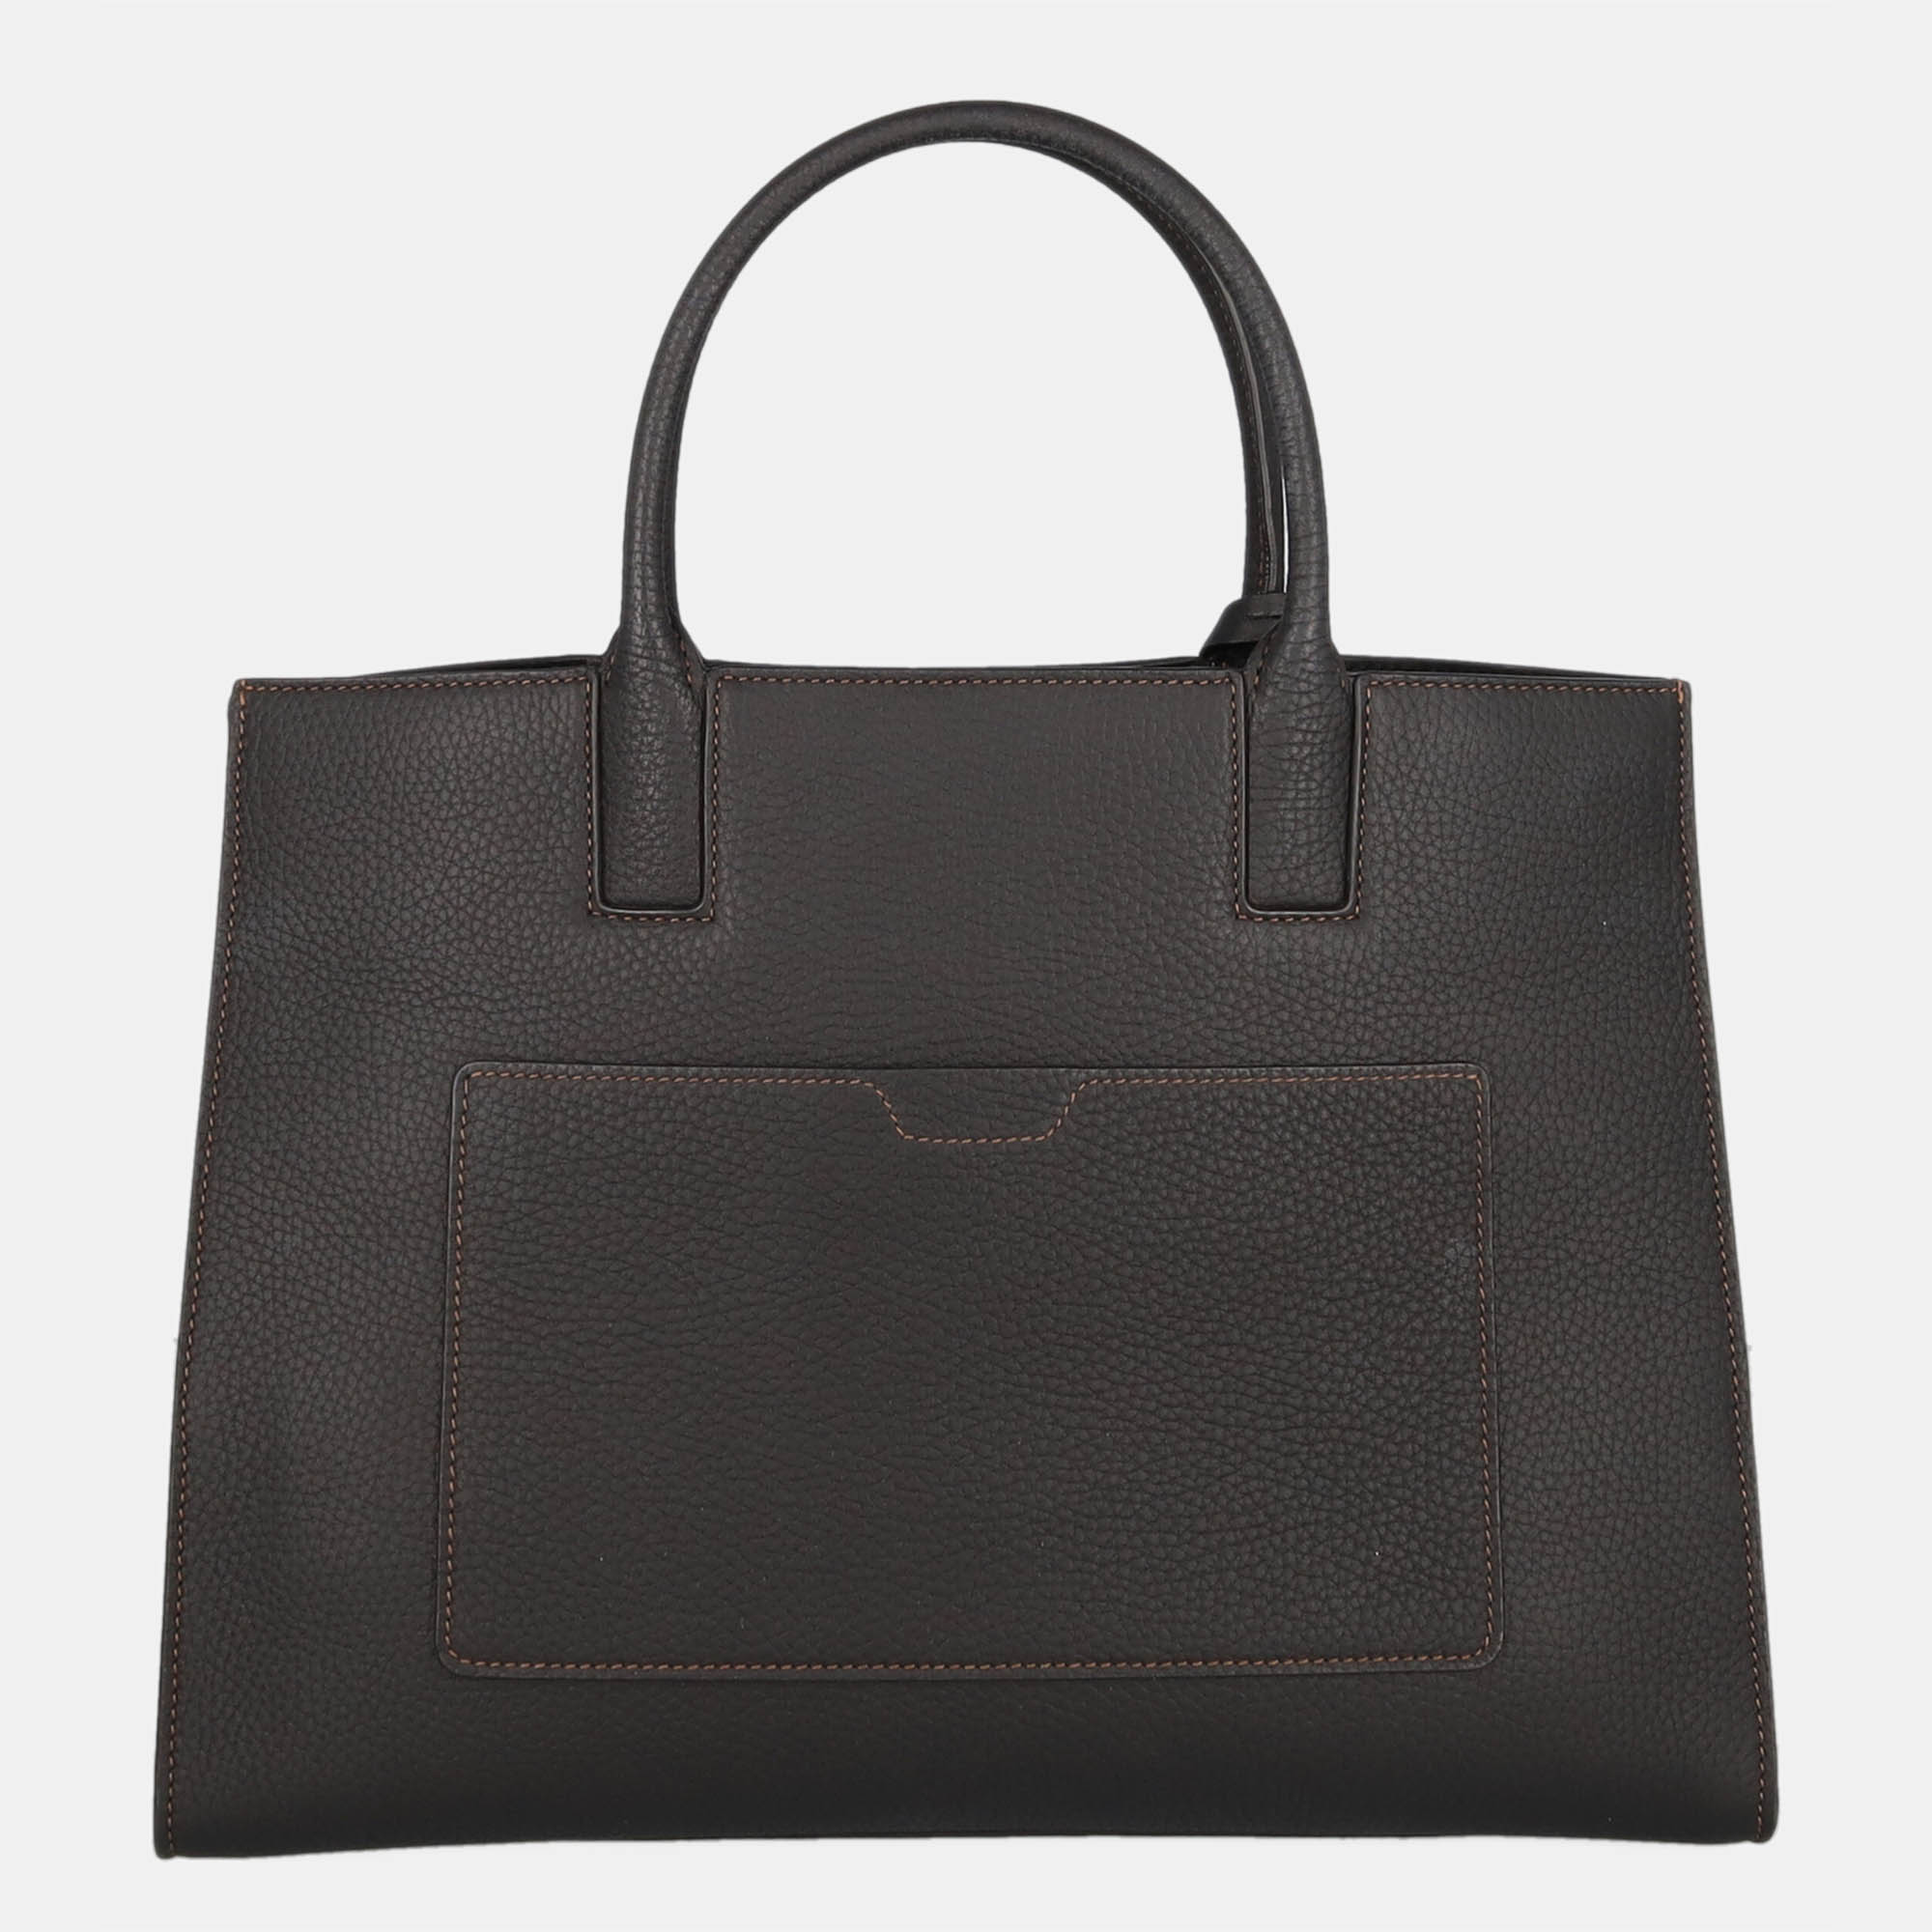 Burberry  Women's Leather Tote Bag - Black - One Size